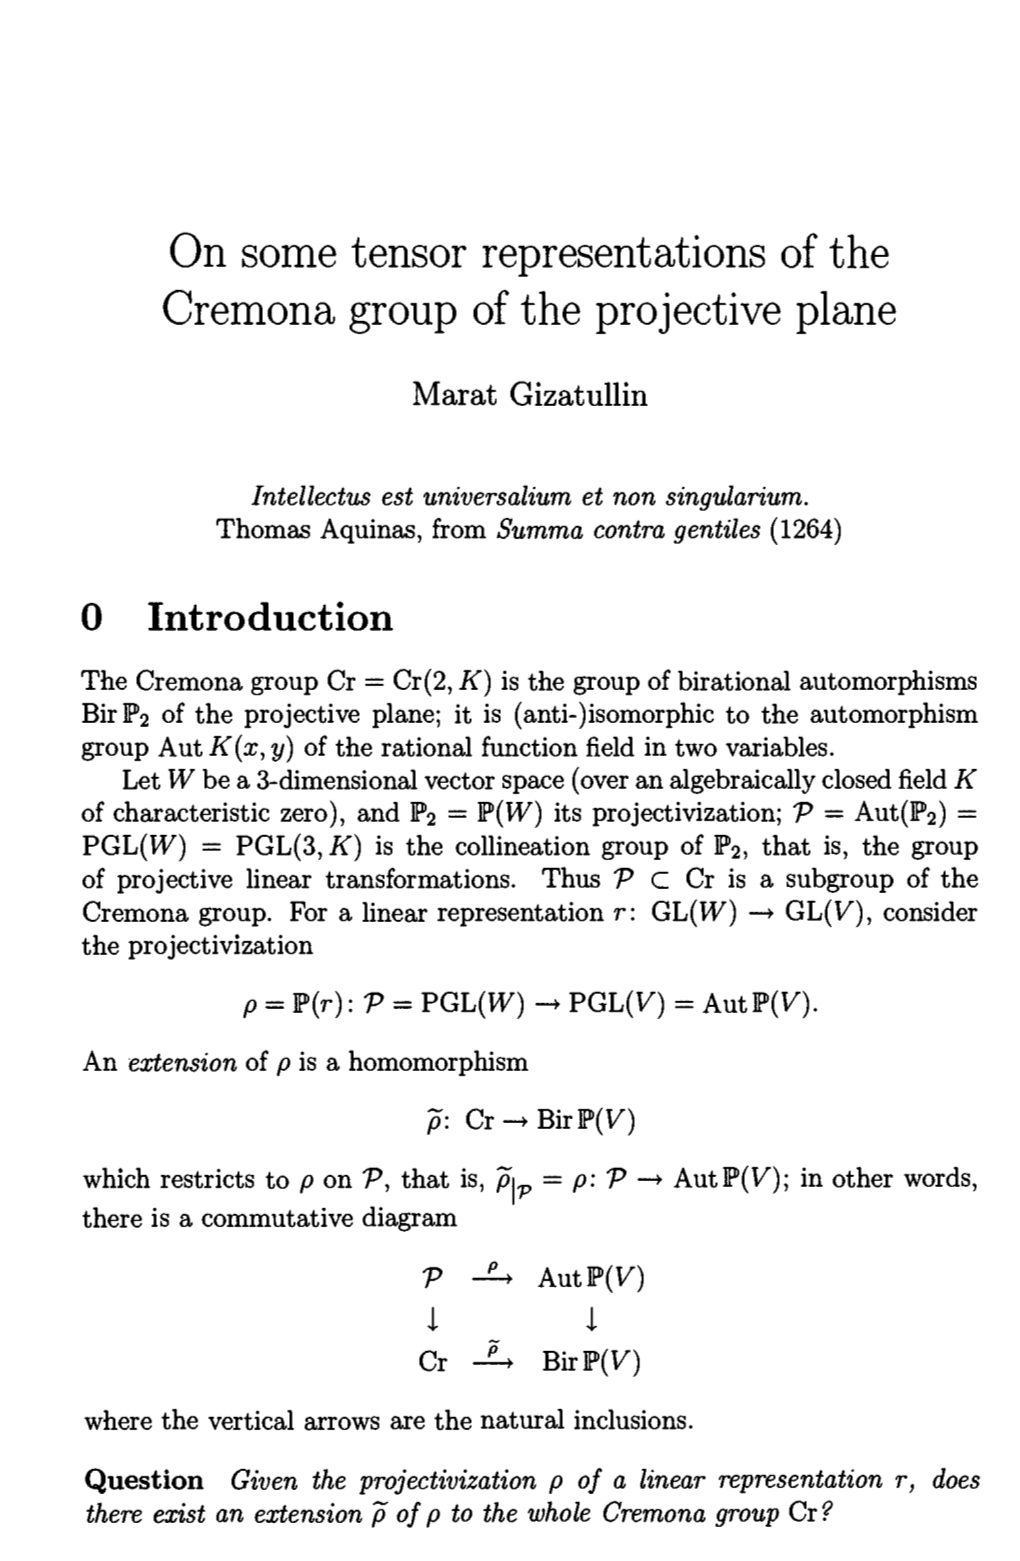 On Some Tensor Representations of the Cremona Group of the Projective Plane